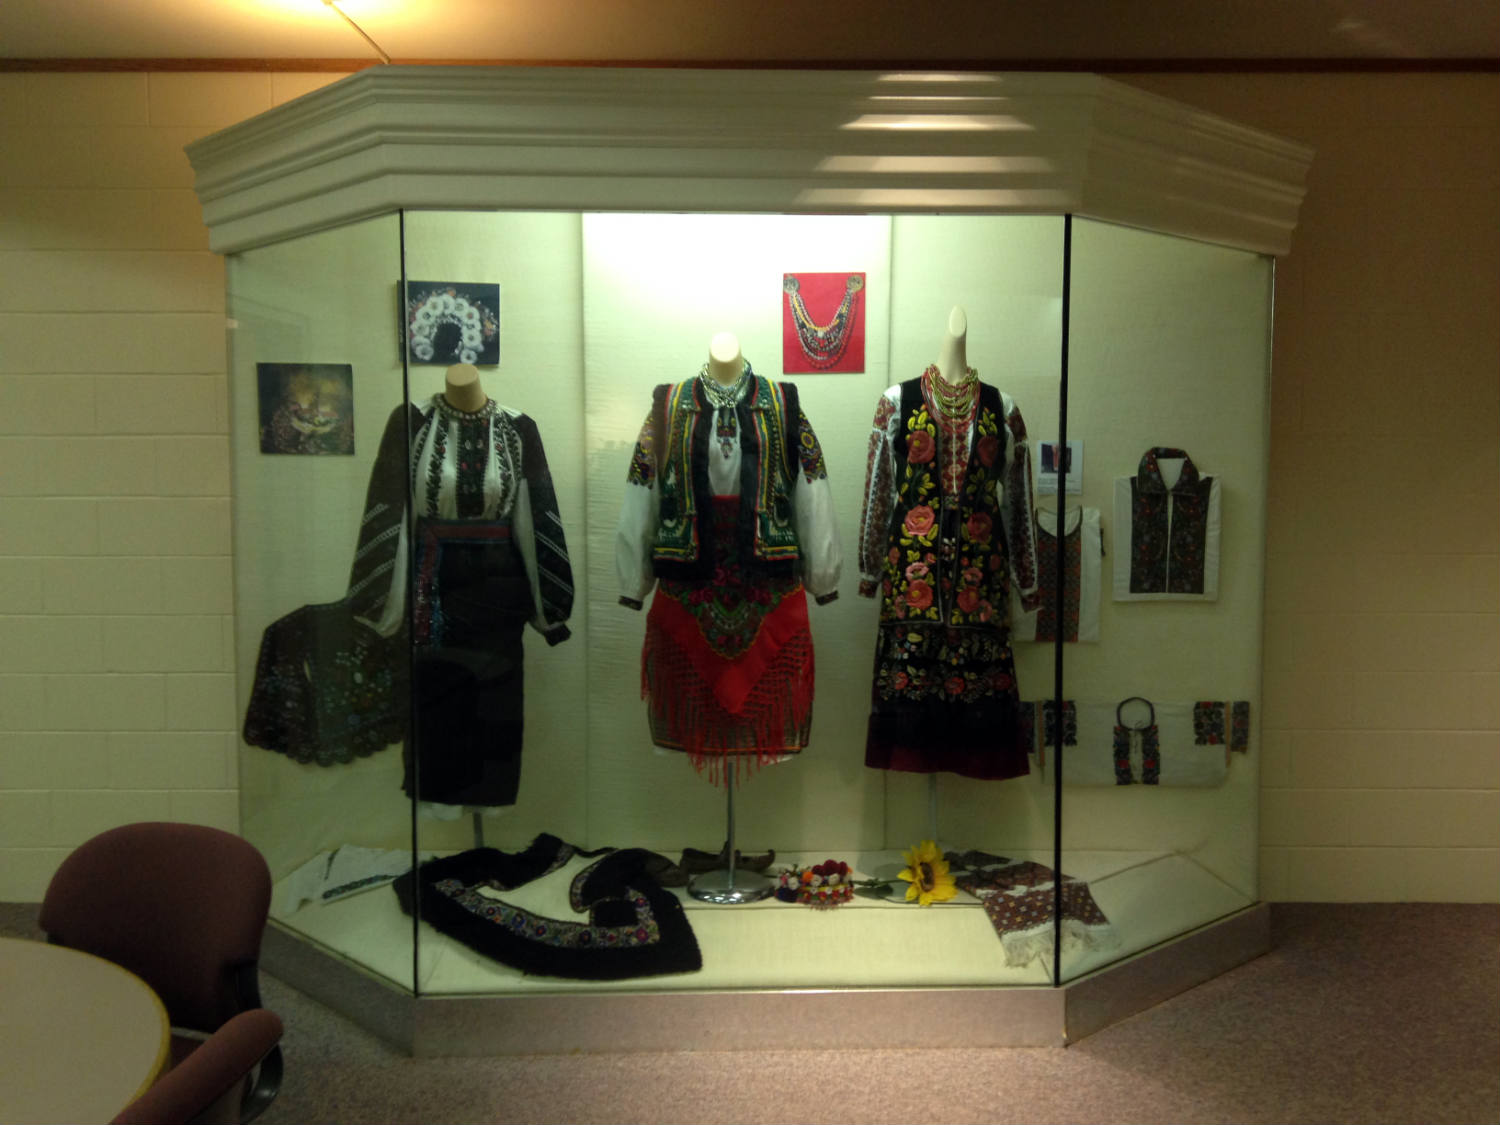 Traditional Ukrainian Costumes at St. Josaphat's Church in Rochester, New York